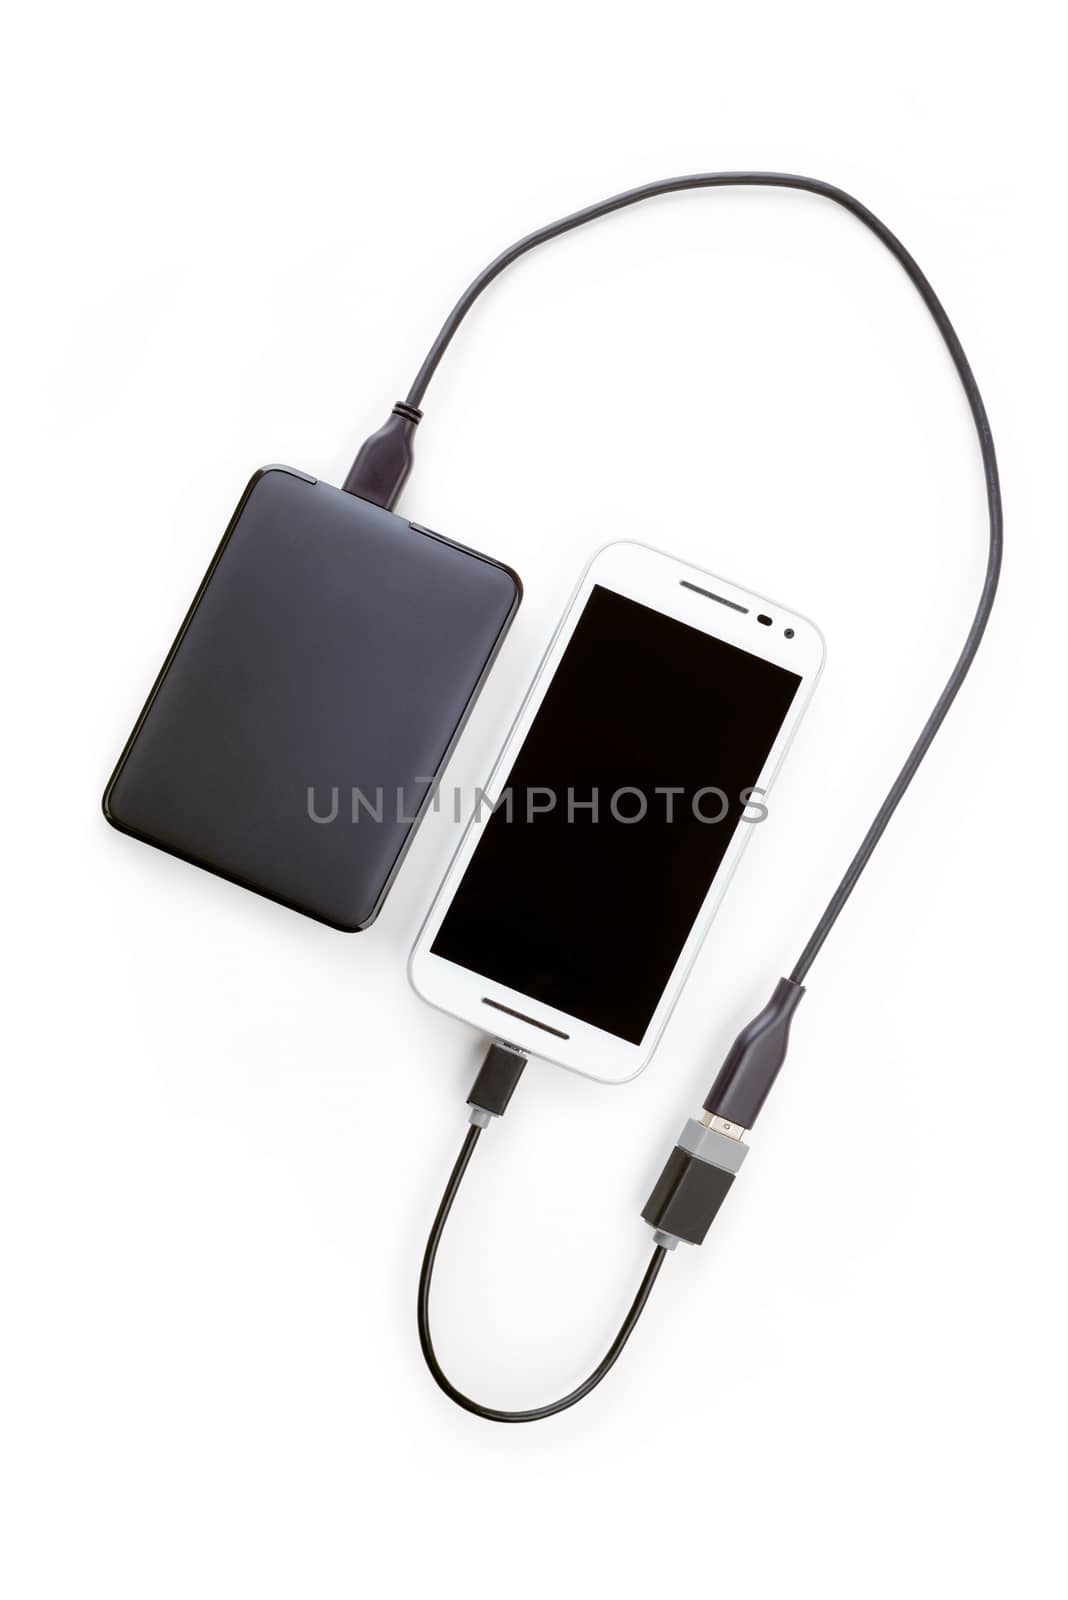 White smartphone connected to a black hard disk drive with an OTG cable. Isolated on white background